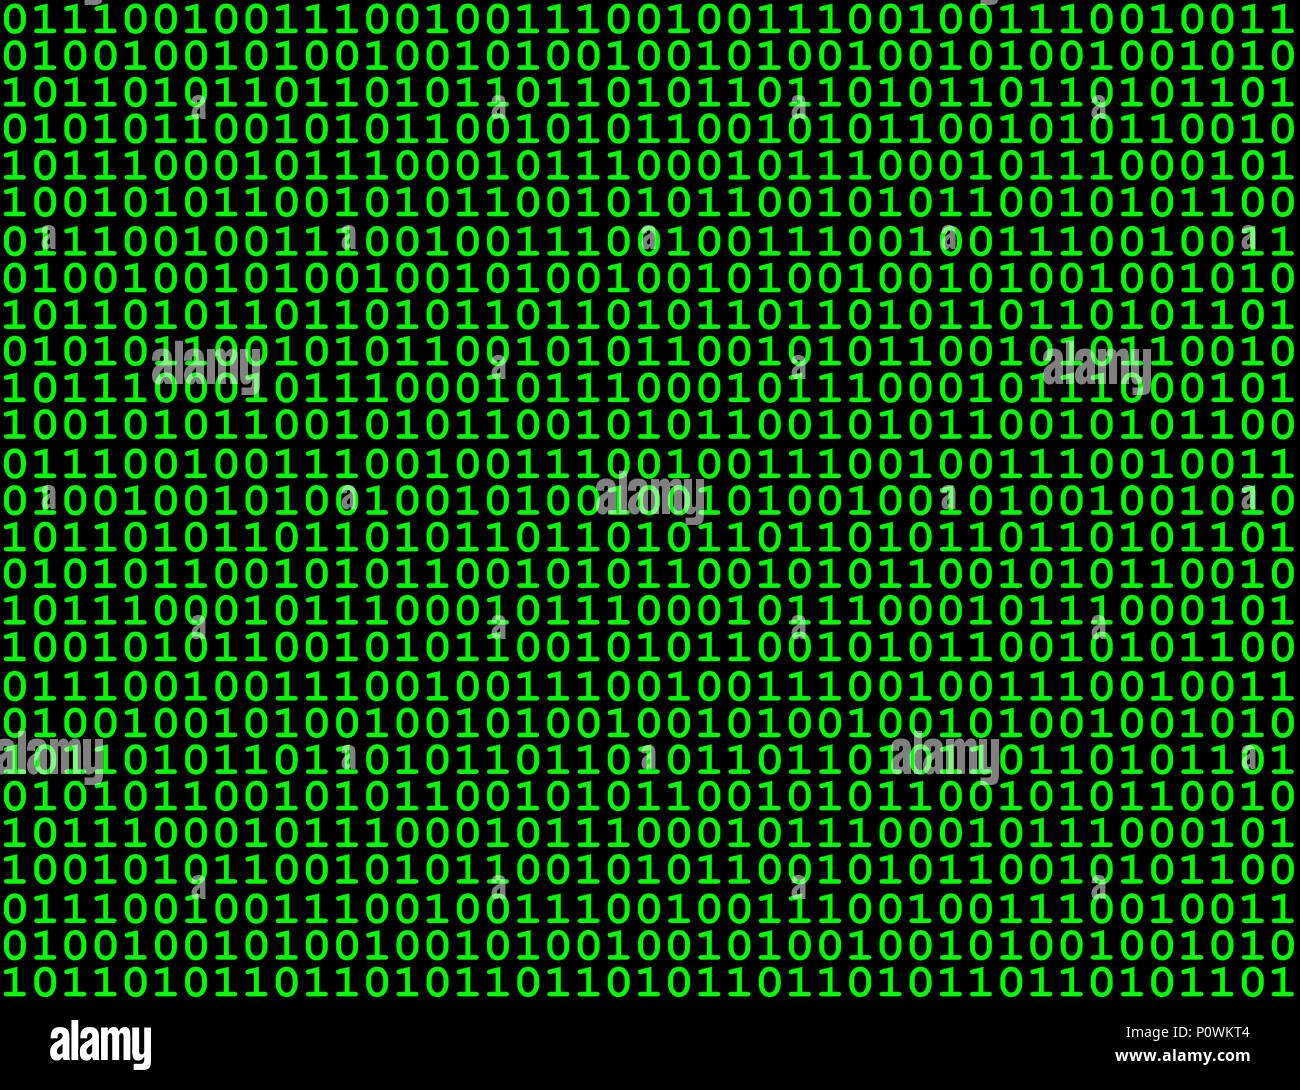 Binary computer data in green against a black background illustration Stock Photo